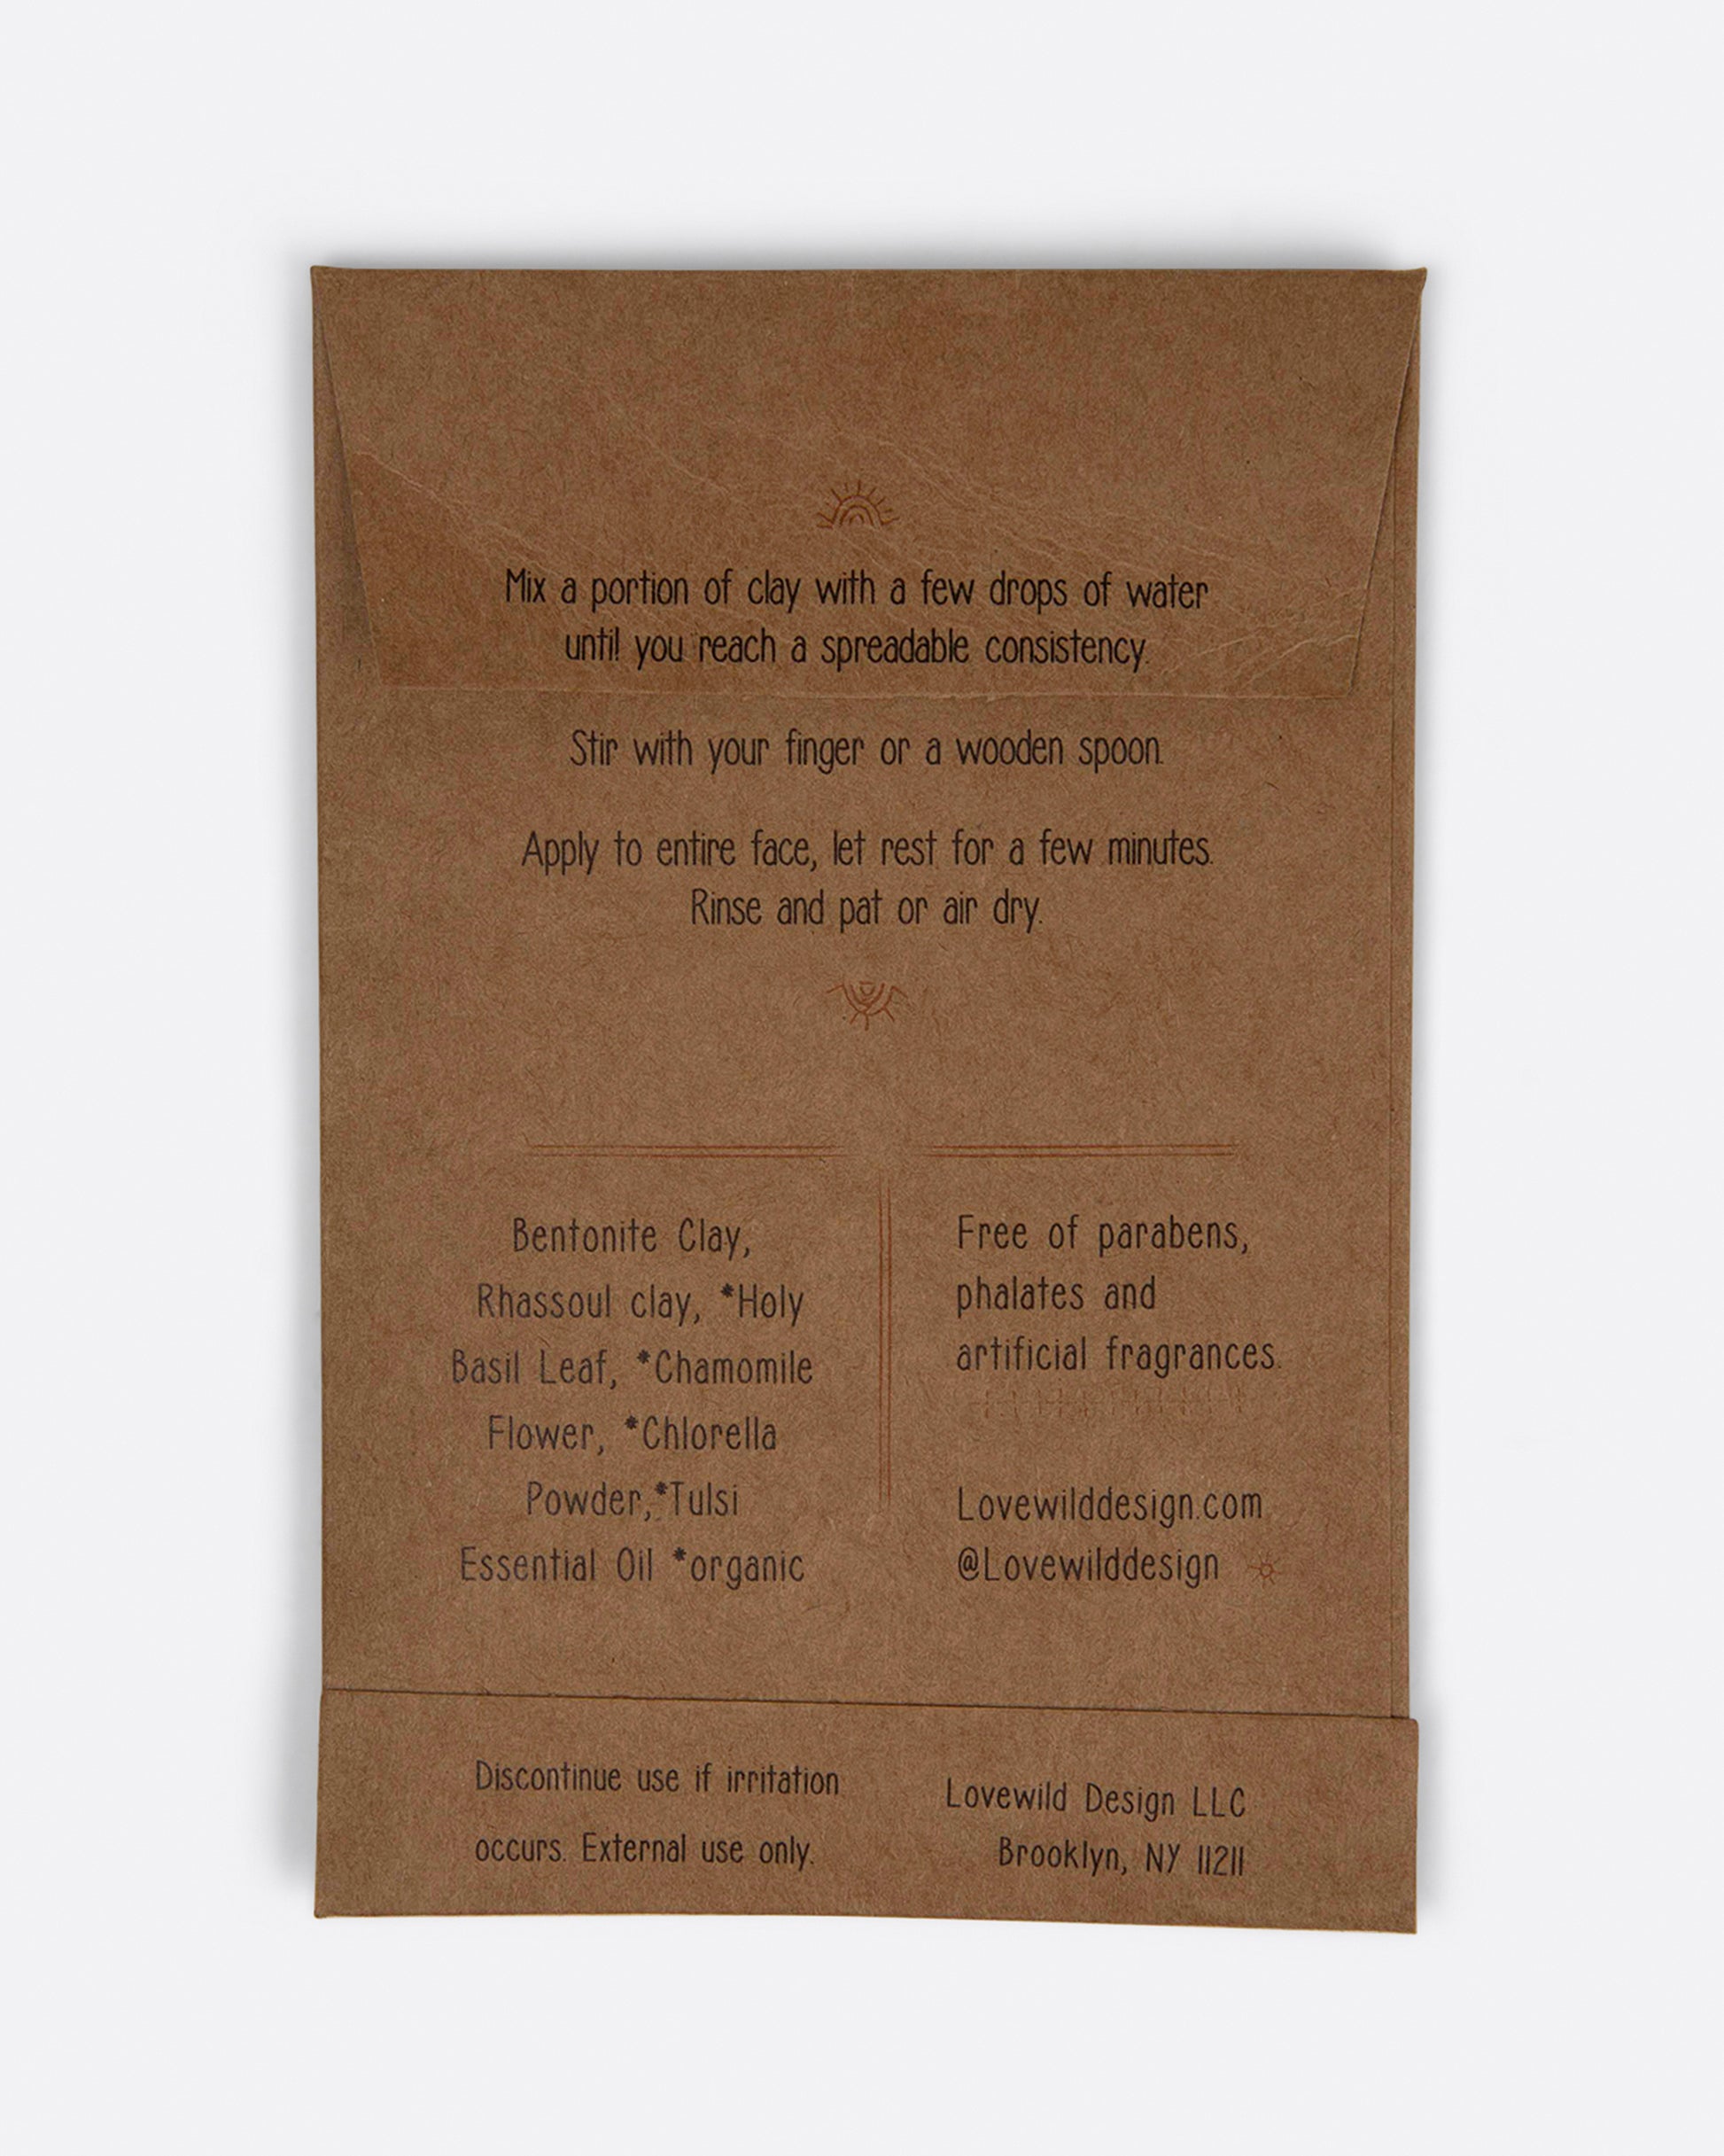 The back side of the kraft paper envelope packing of the Deep Pore Cleansing Face Mask.